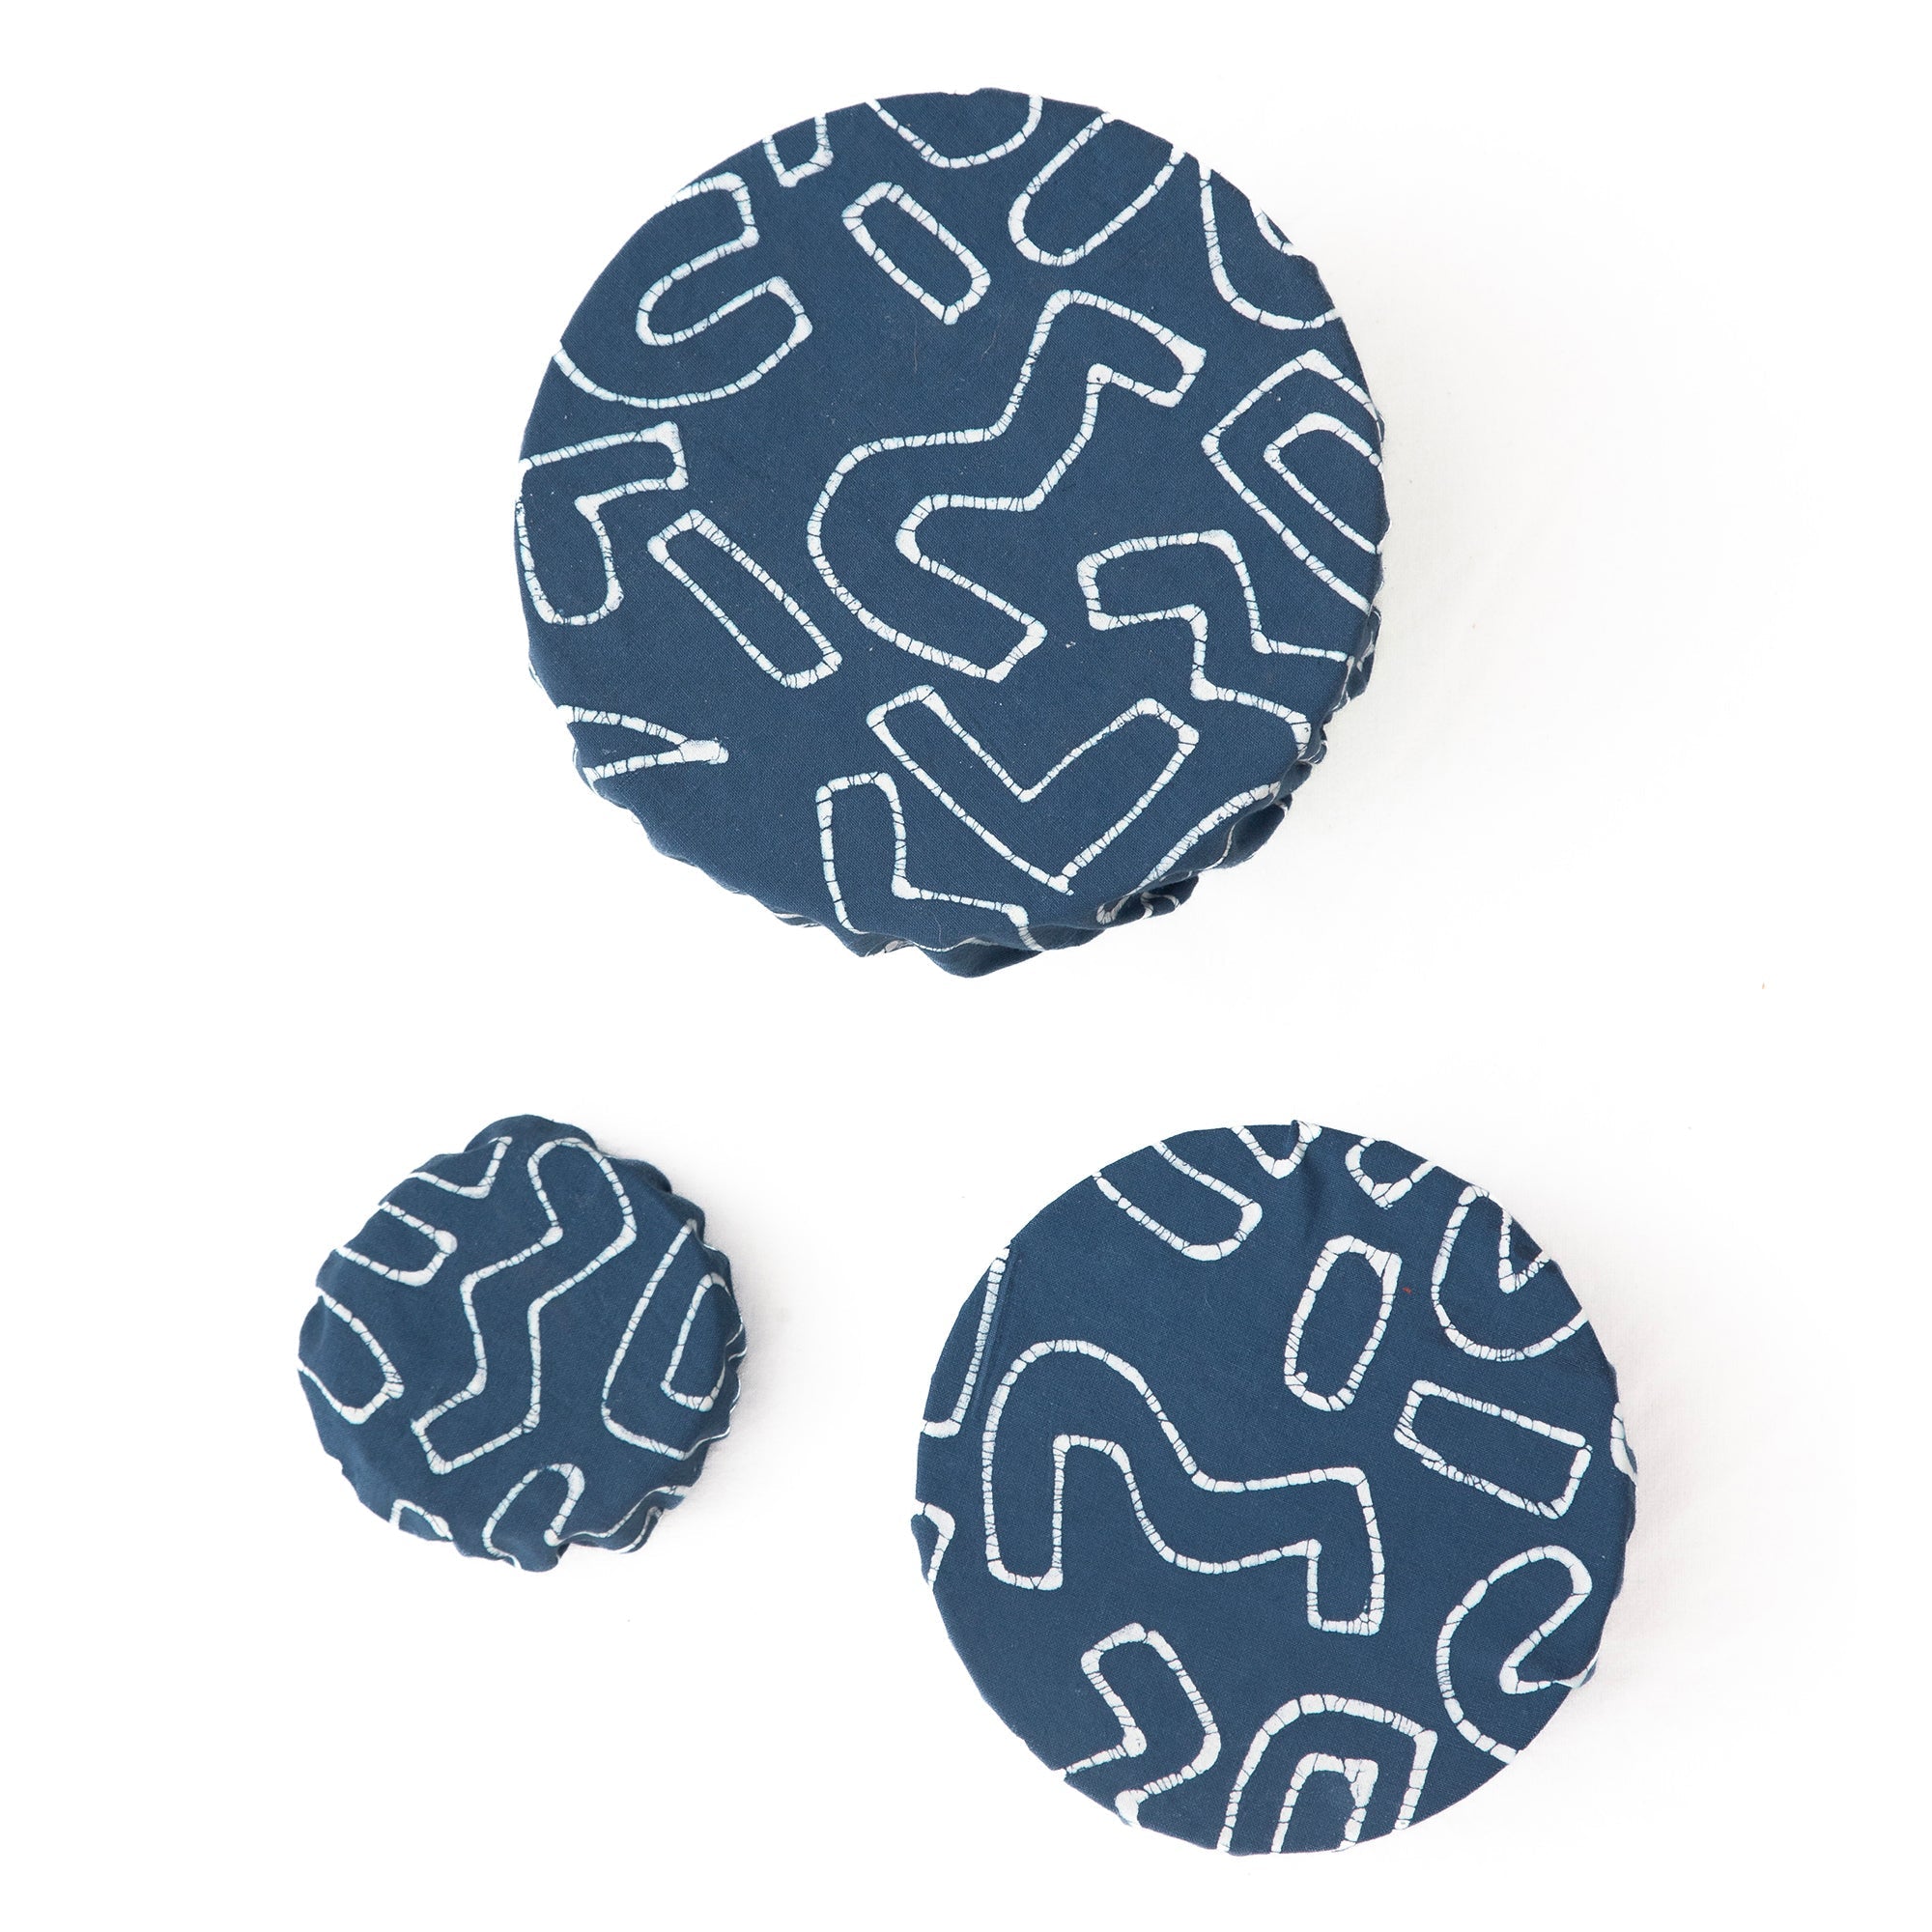 African made indigo blue bowl covers, adorned with a squiggle pattern and made from 100% cotton.